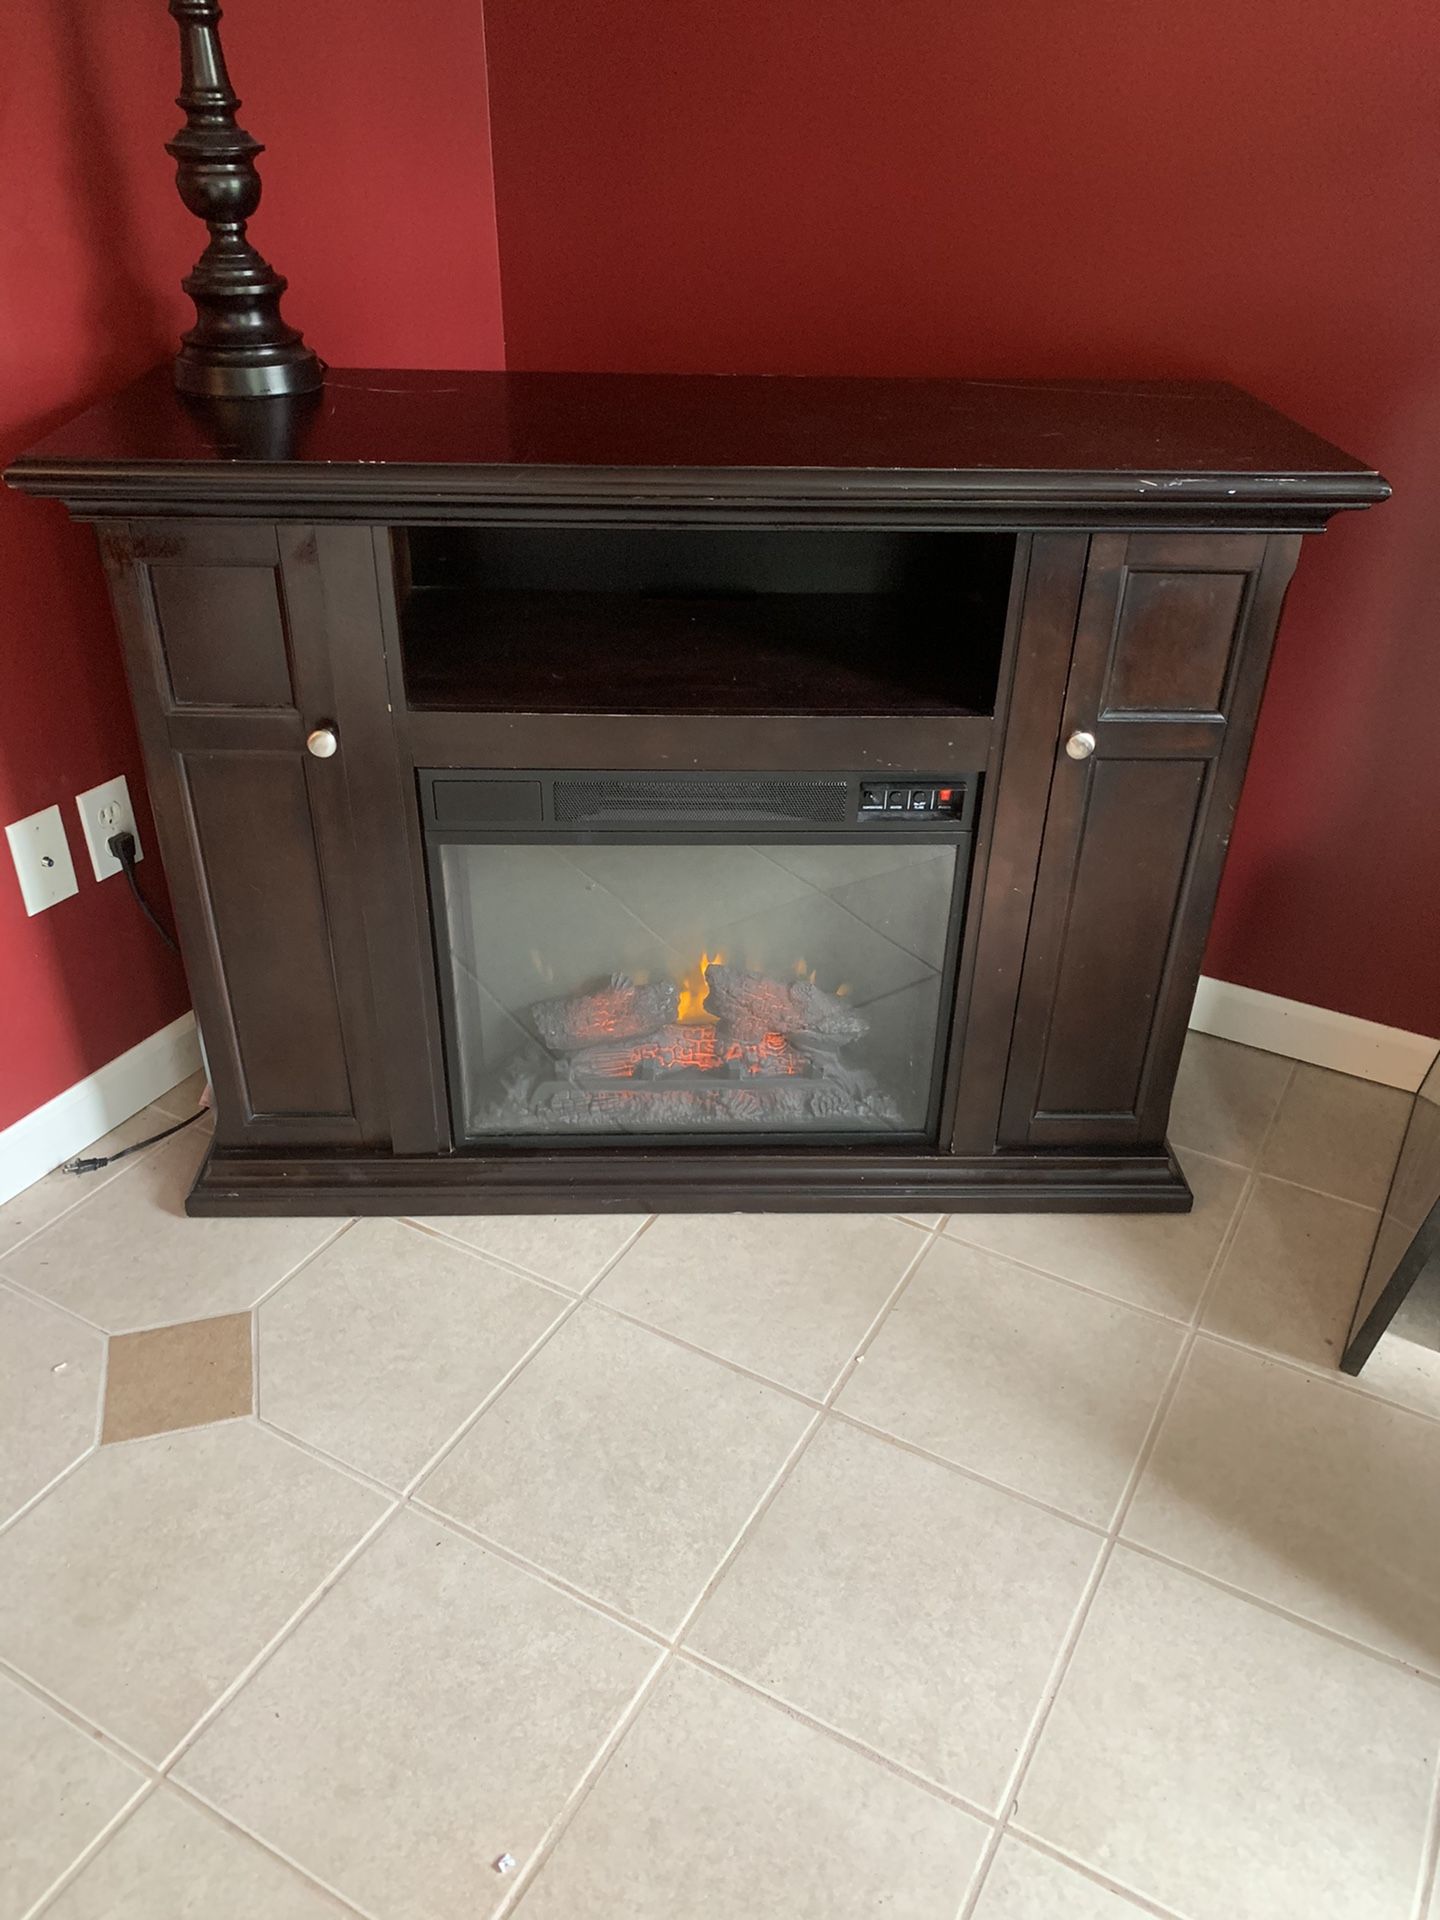 Electric fire place and TV stand